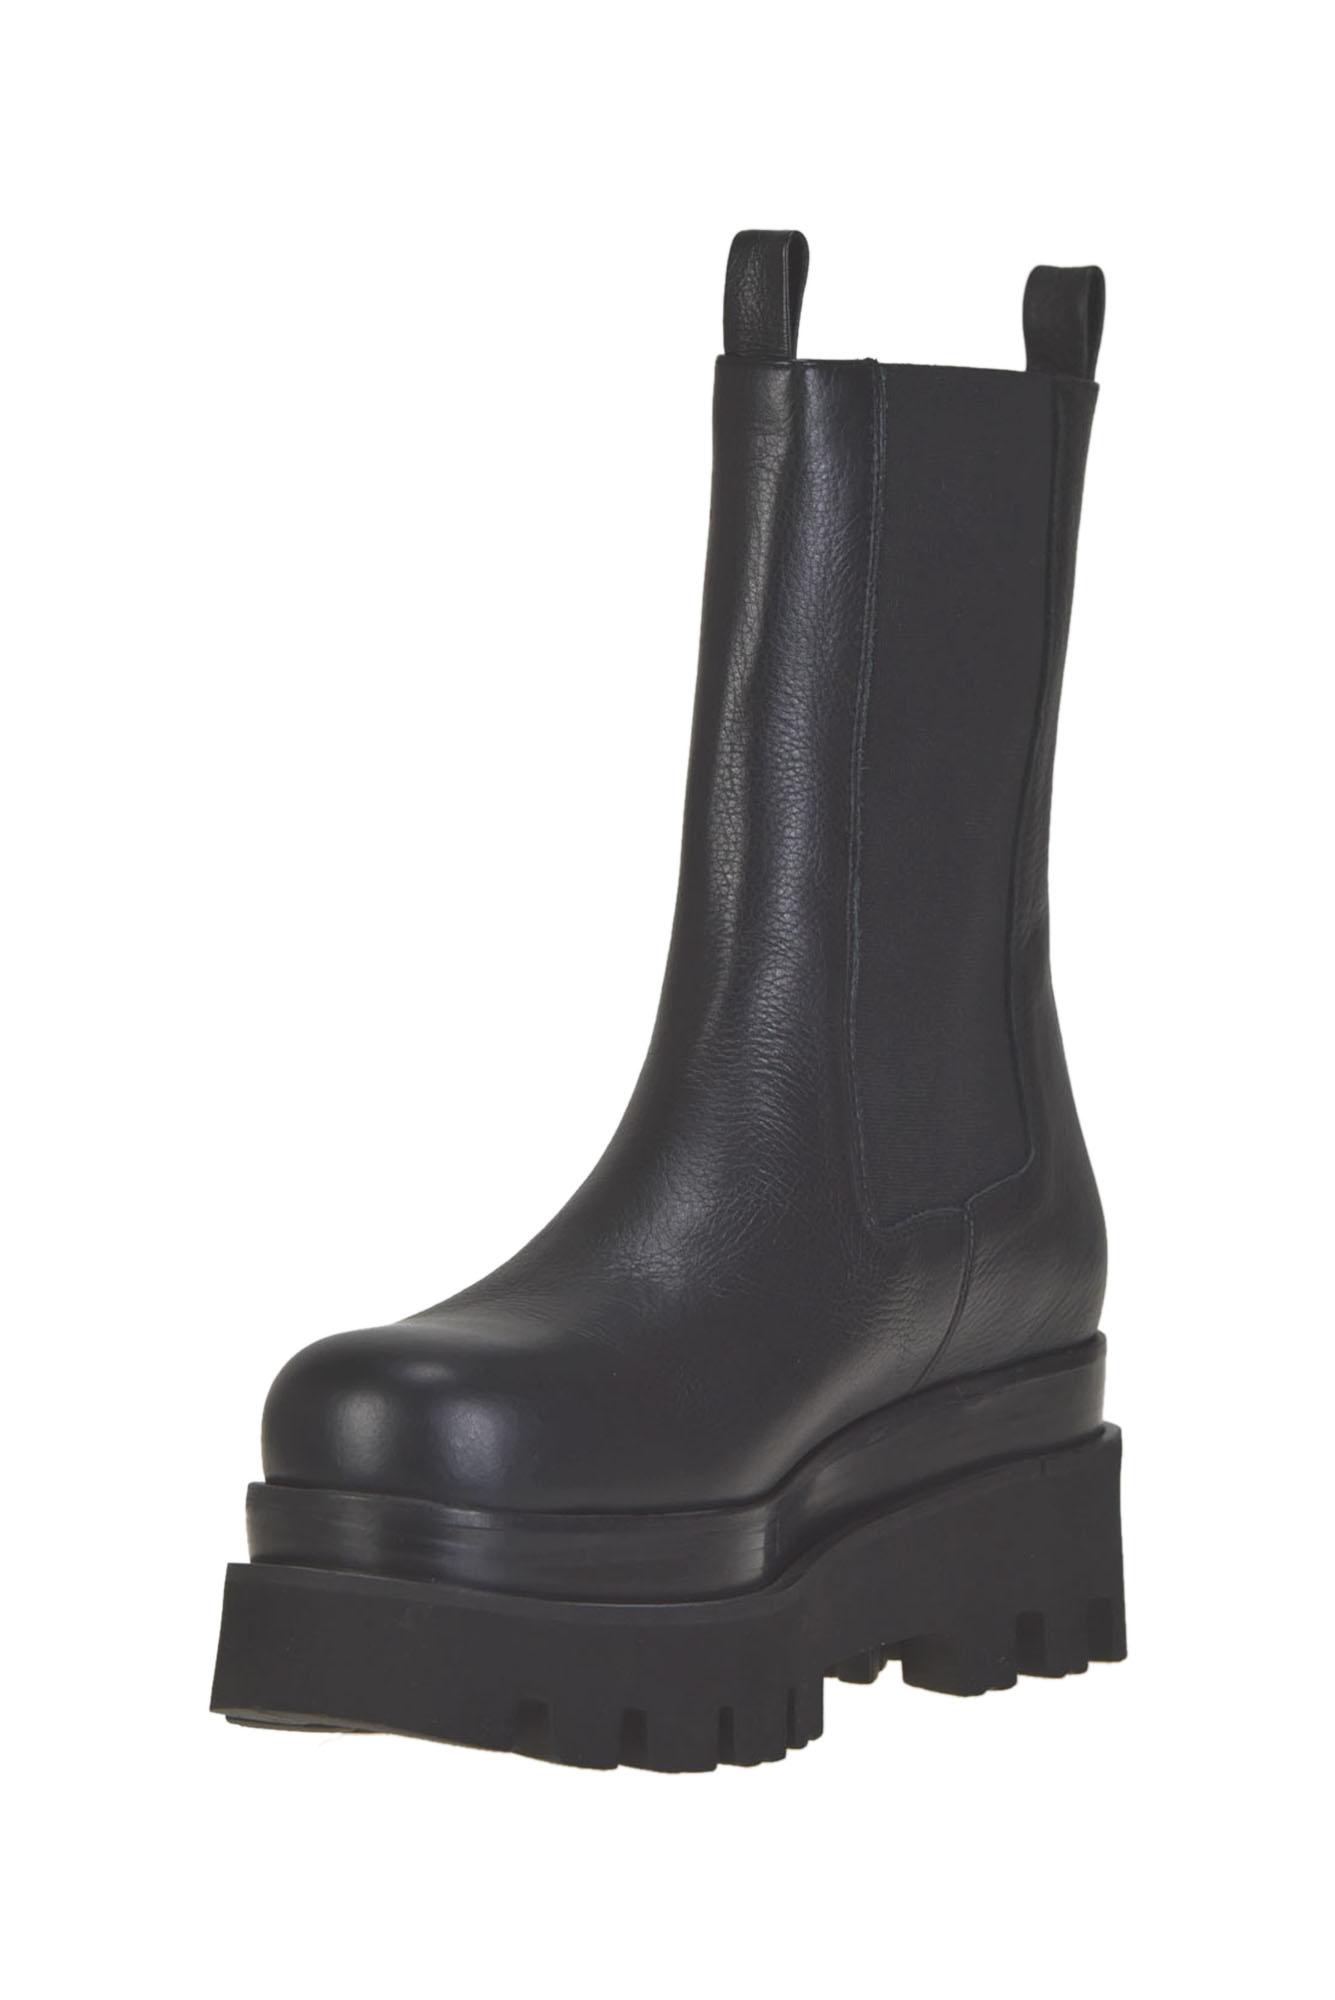 Paloma Barceló Akeita Wedge Chelsea Ankle-boots in Black | Lyst